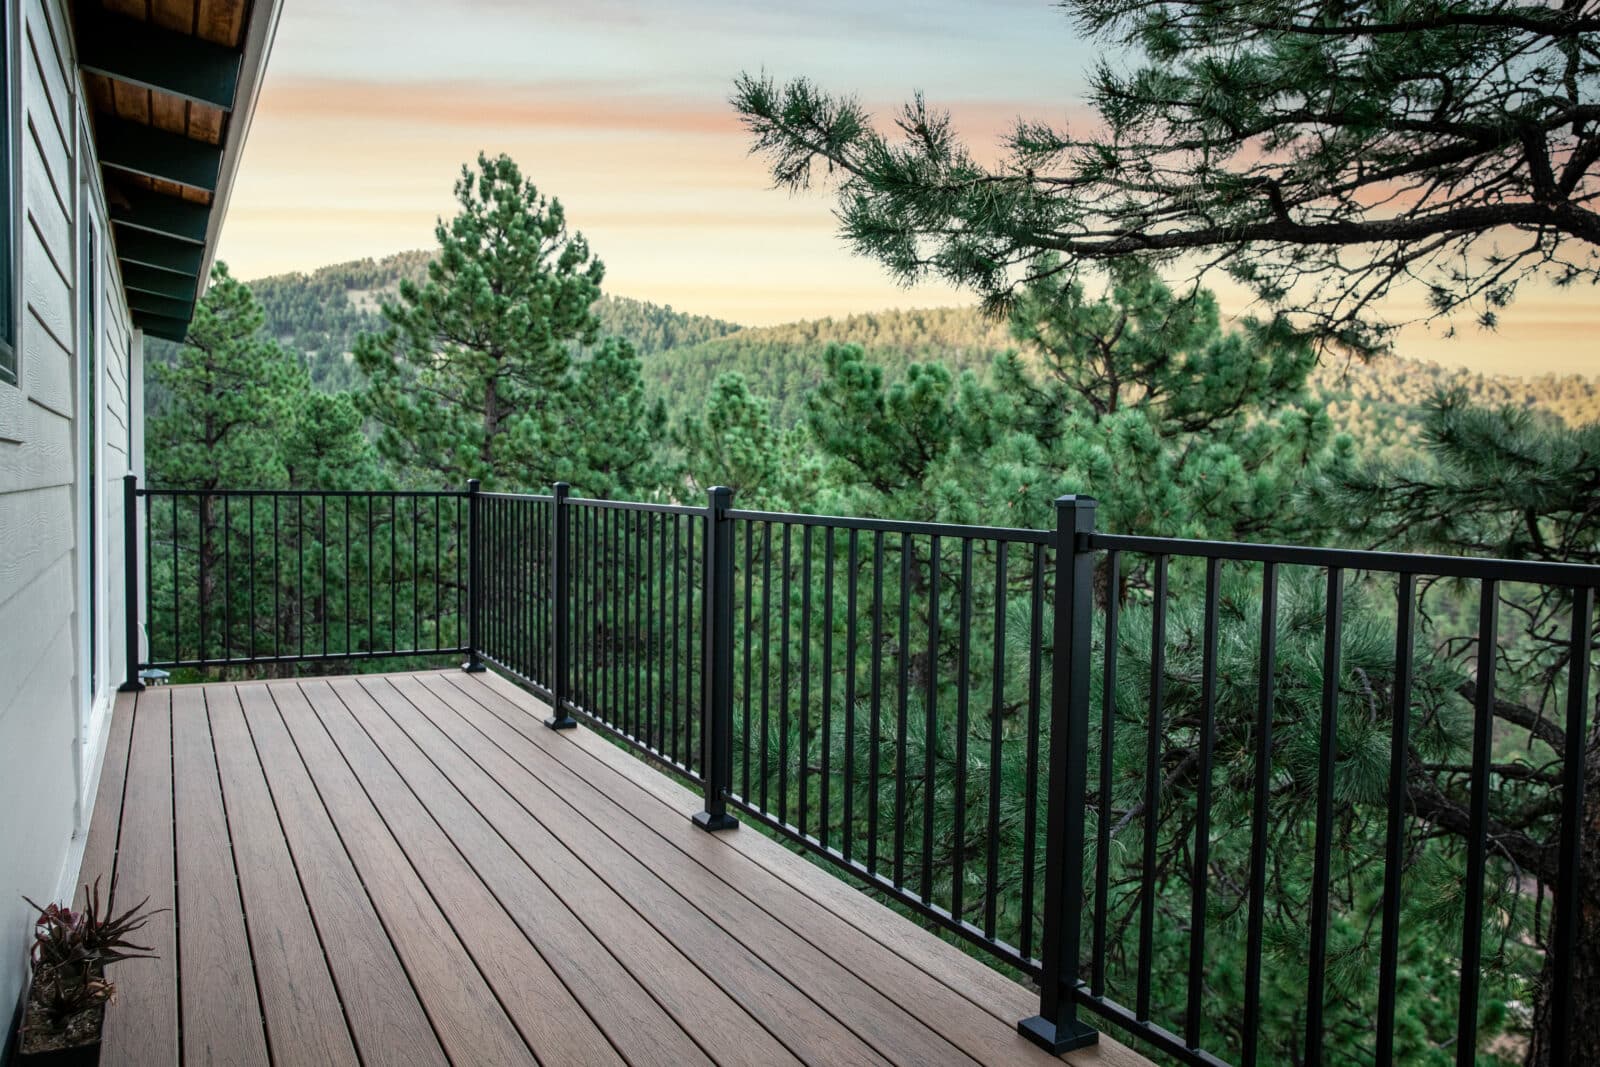 Photo of a scenic view of the Rocky Mountains from an elevated deck